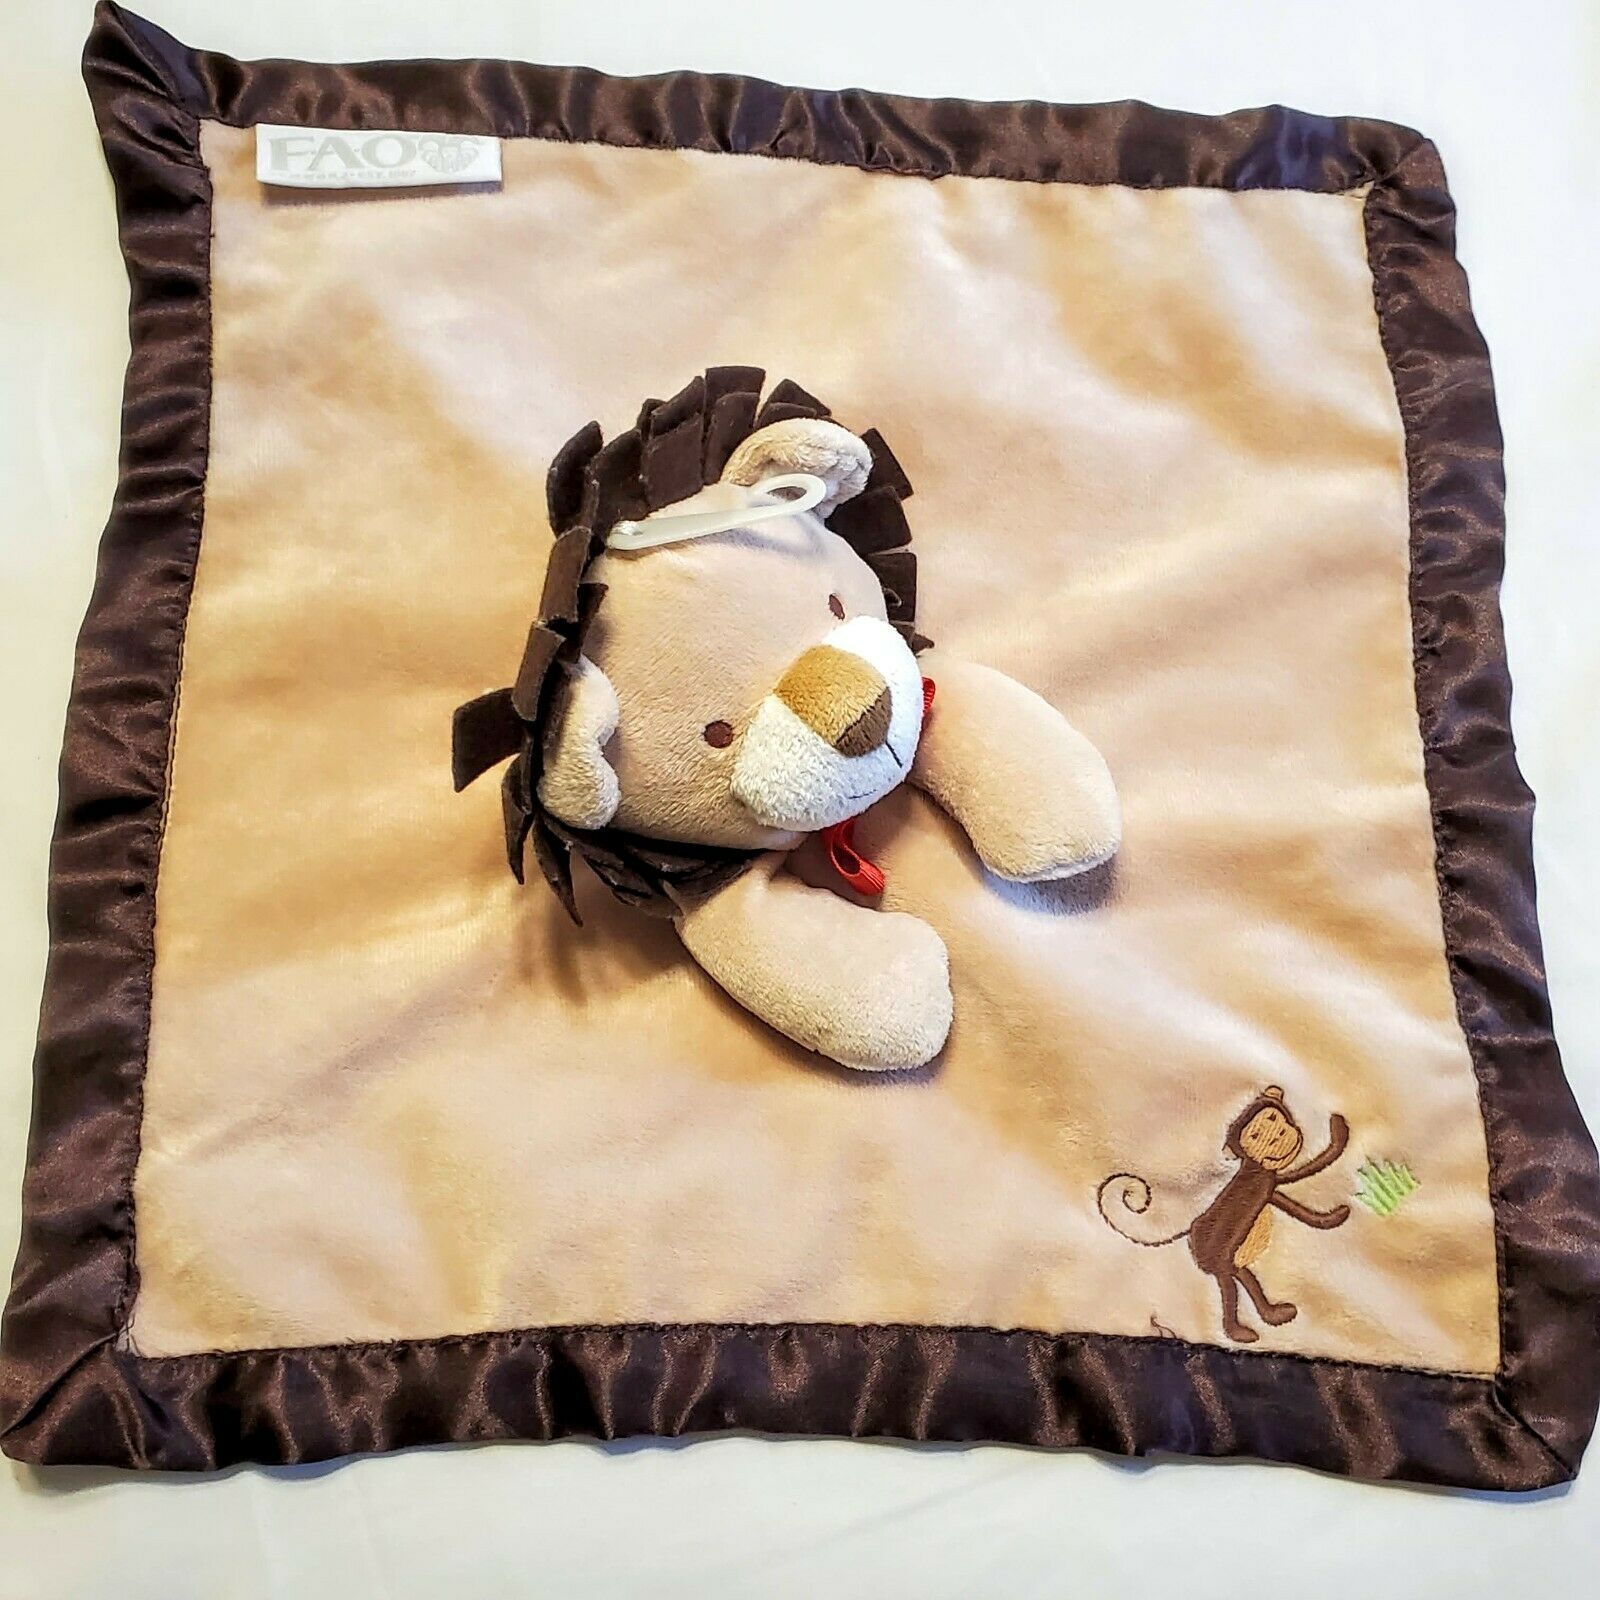 Primary image for FAO Babies R Us Lovey Security Blanket Plush Monkey Lion Brown Satin Tan 13x13"